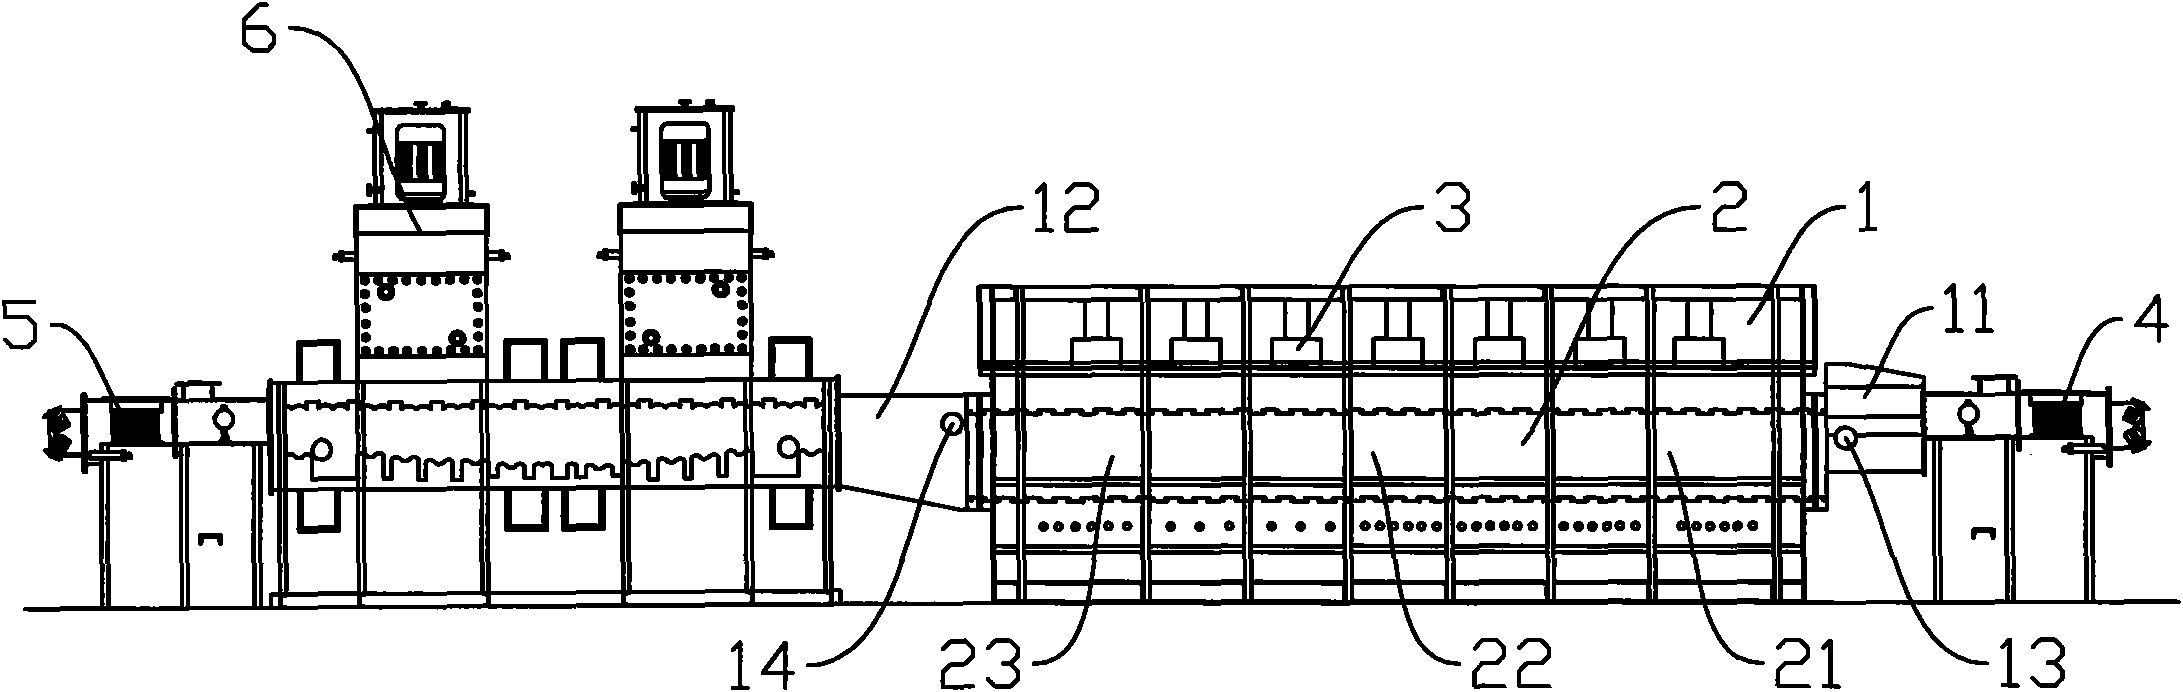 Continuous annealing furnace